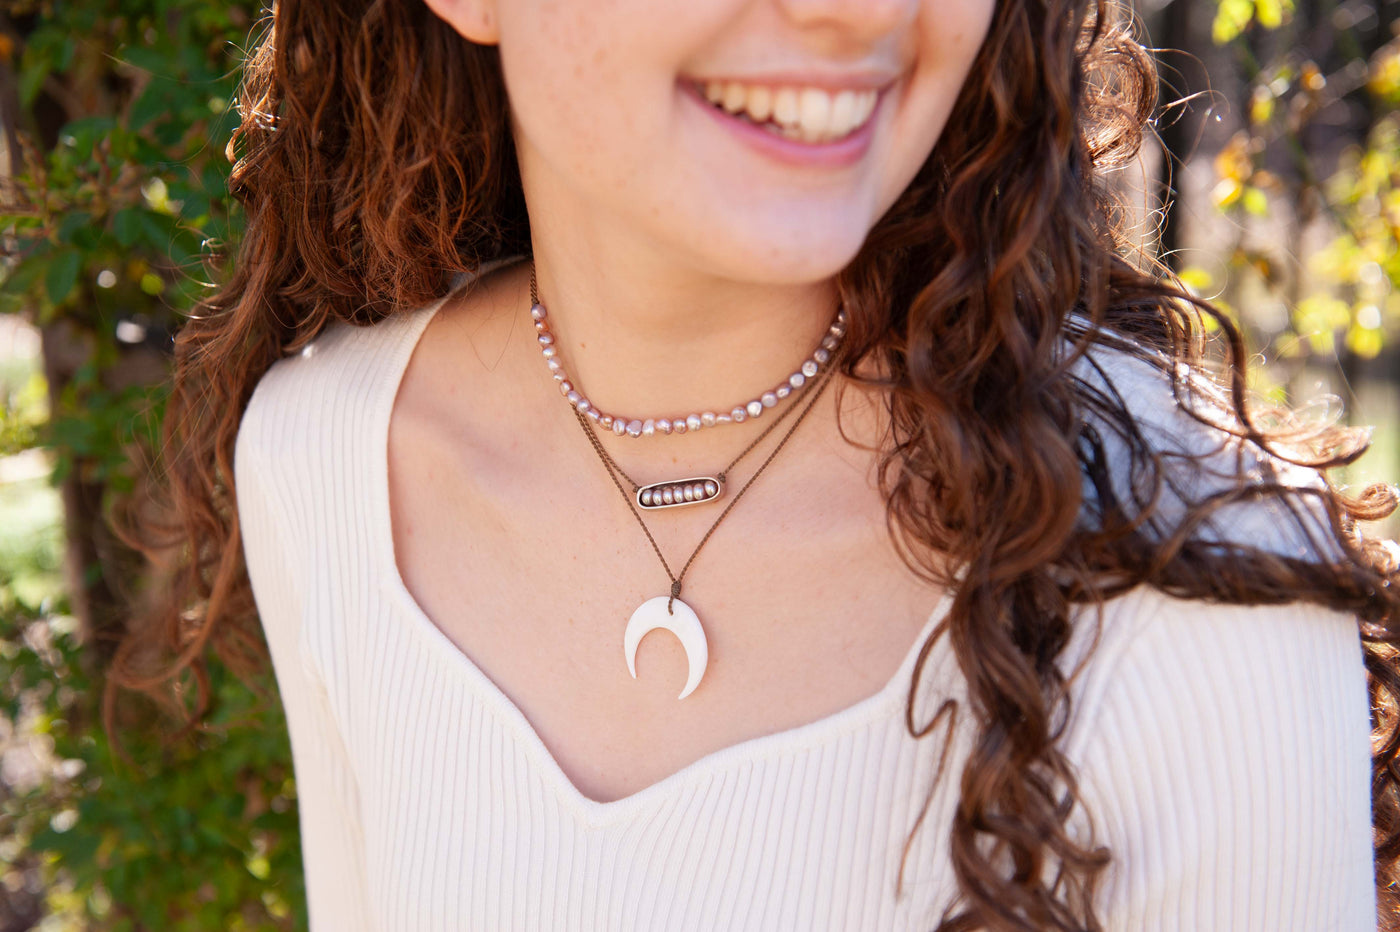 Girl Crush - Necklace Stack (15% off)